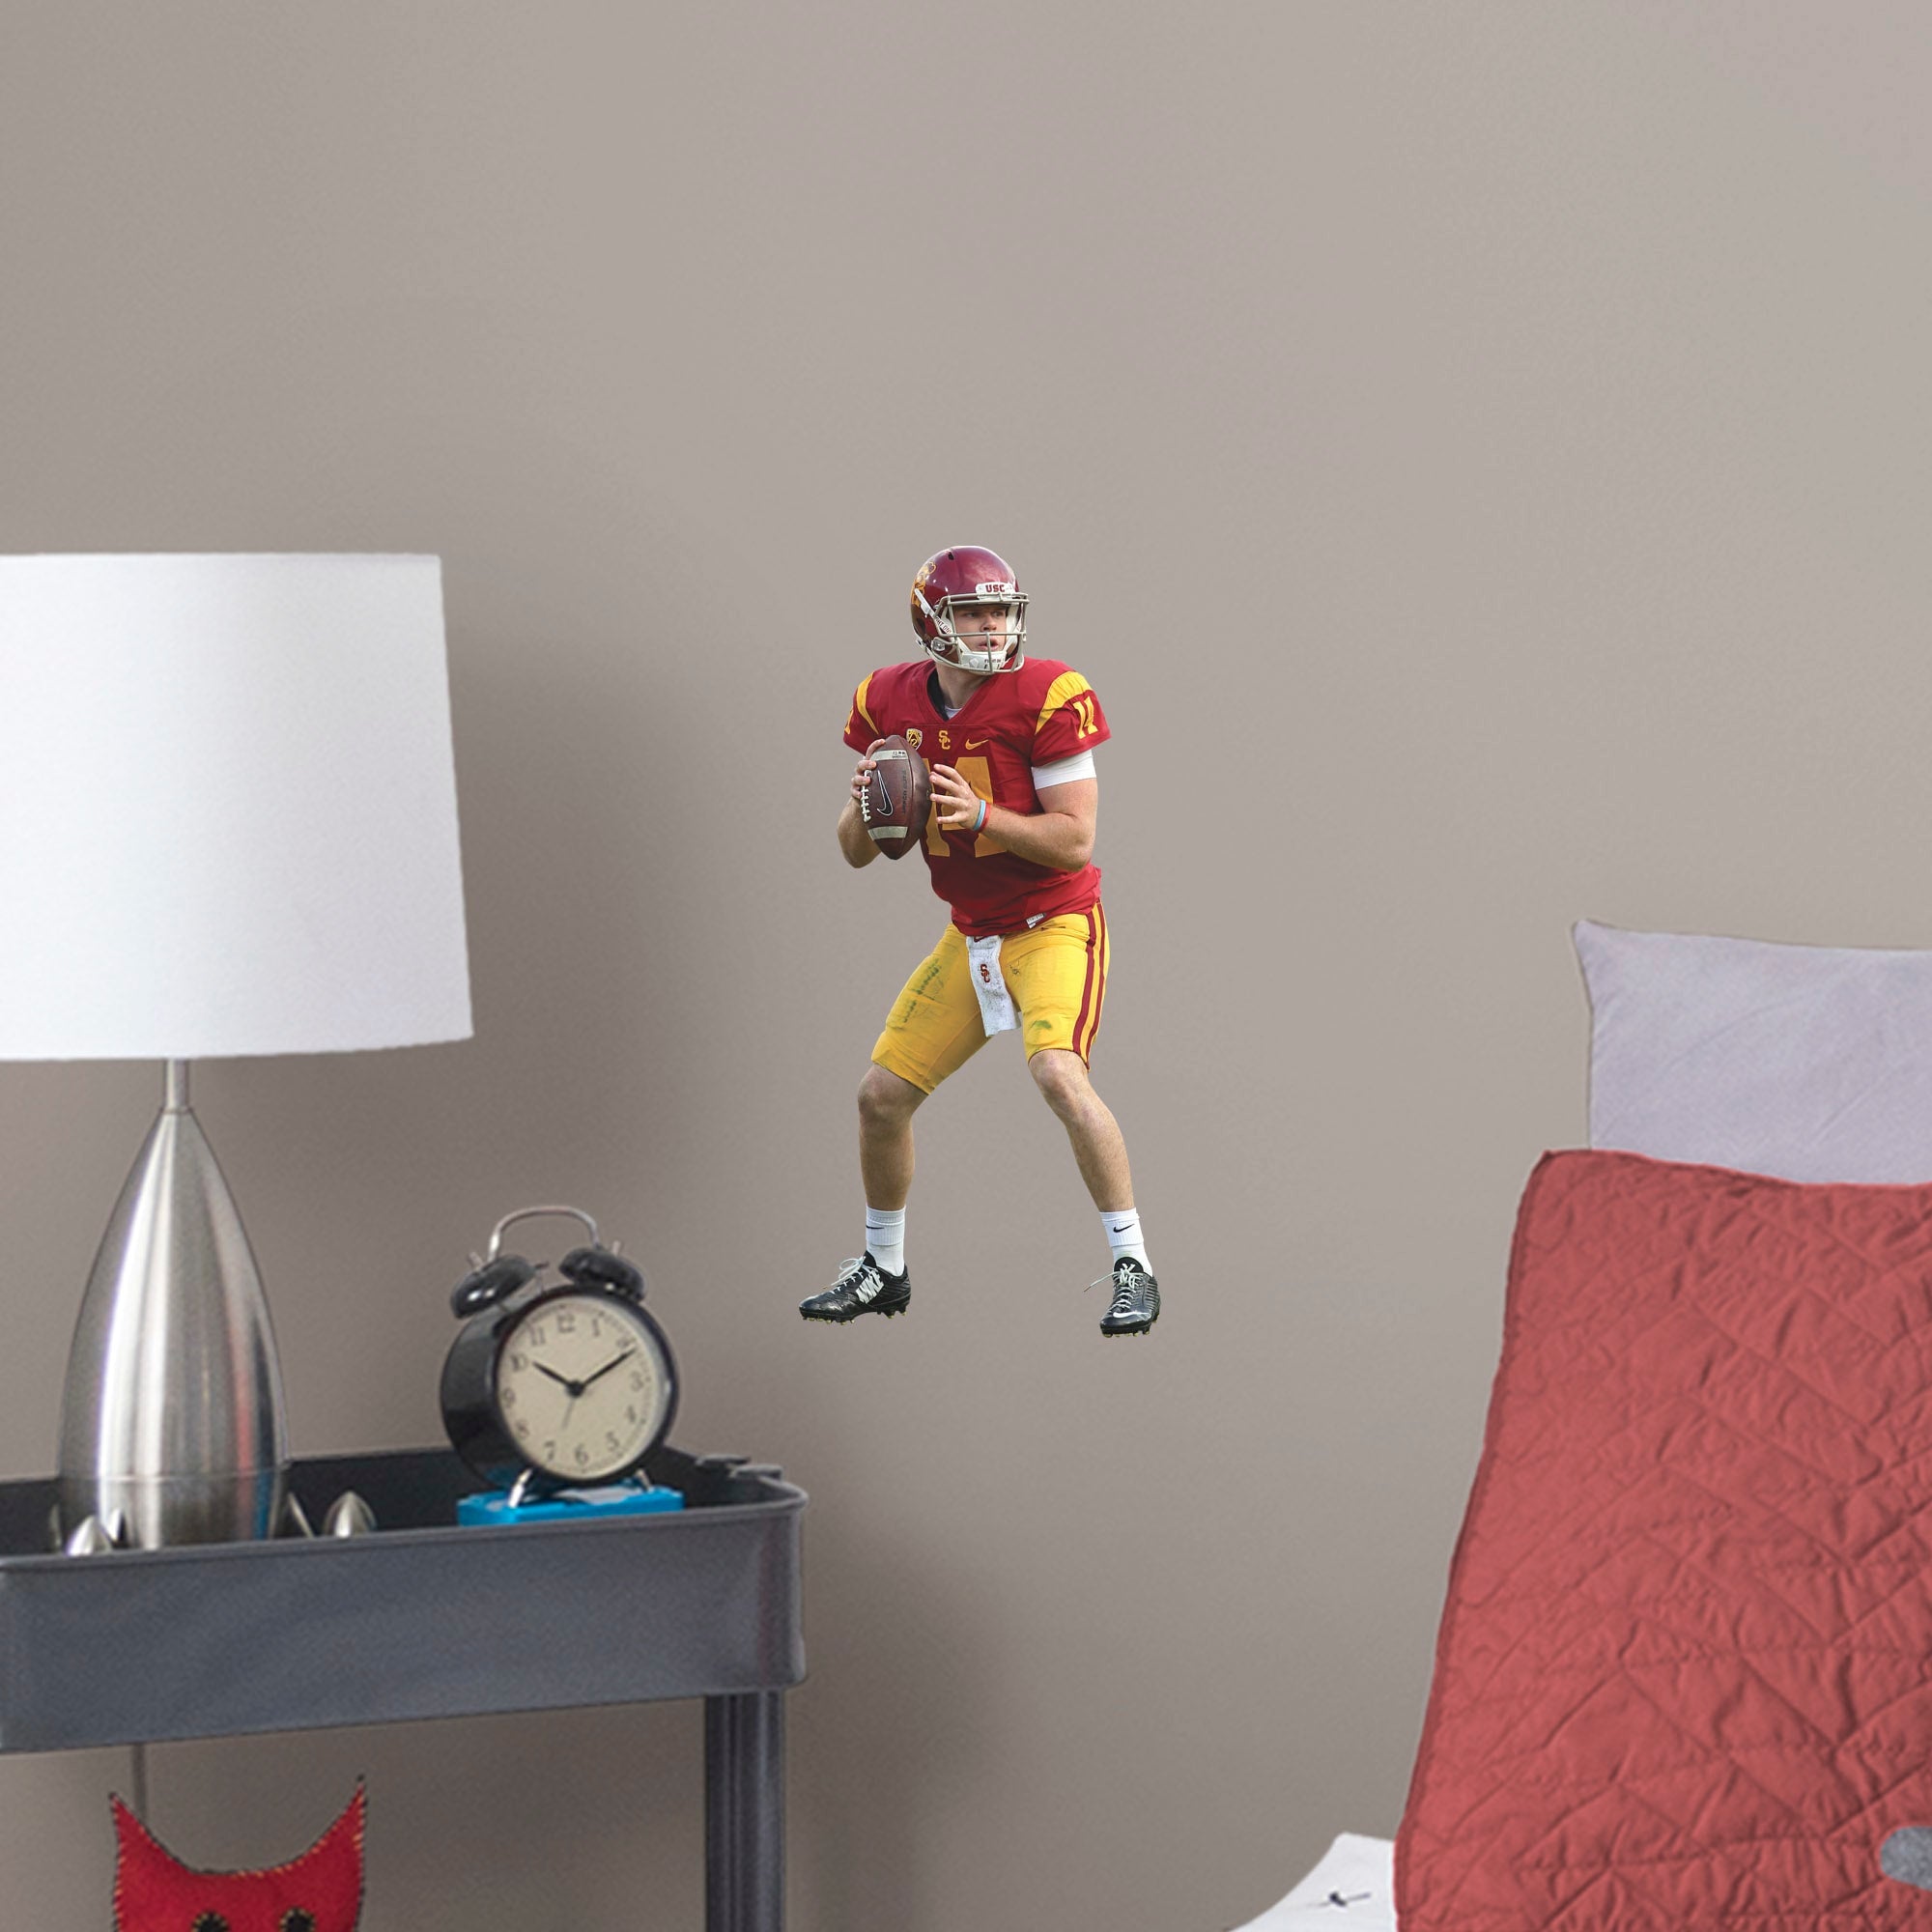 Sam Darnold for USC Trojans: USC - Officially Licensed Removable Wall Decal Large by Fathead | Vinyl